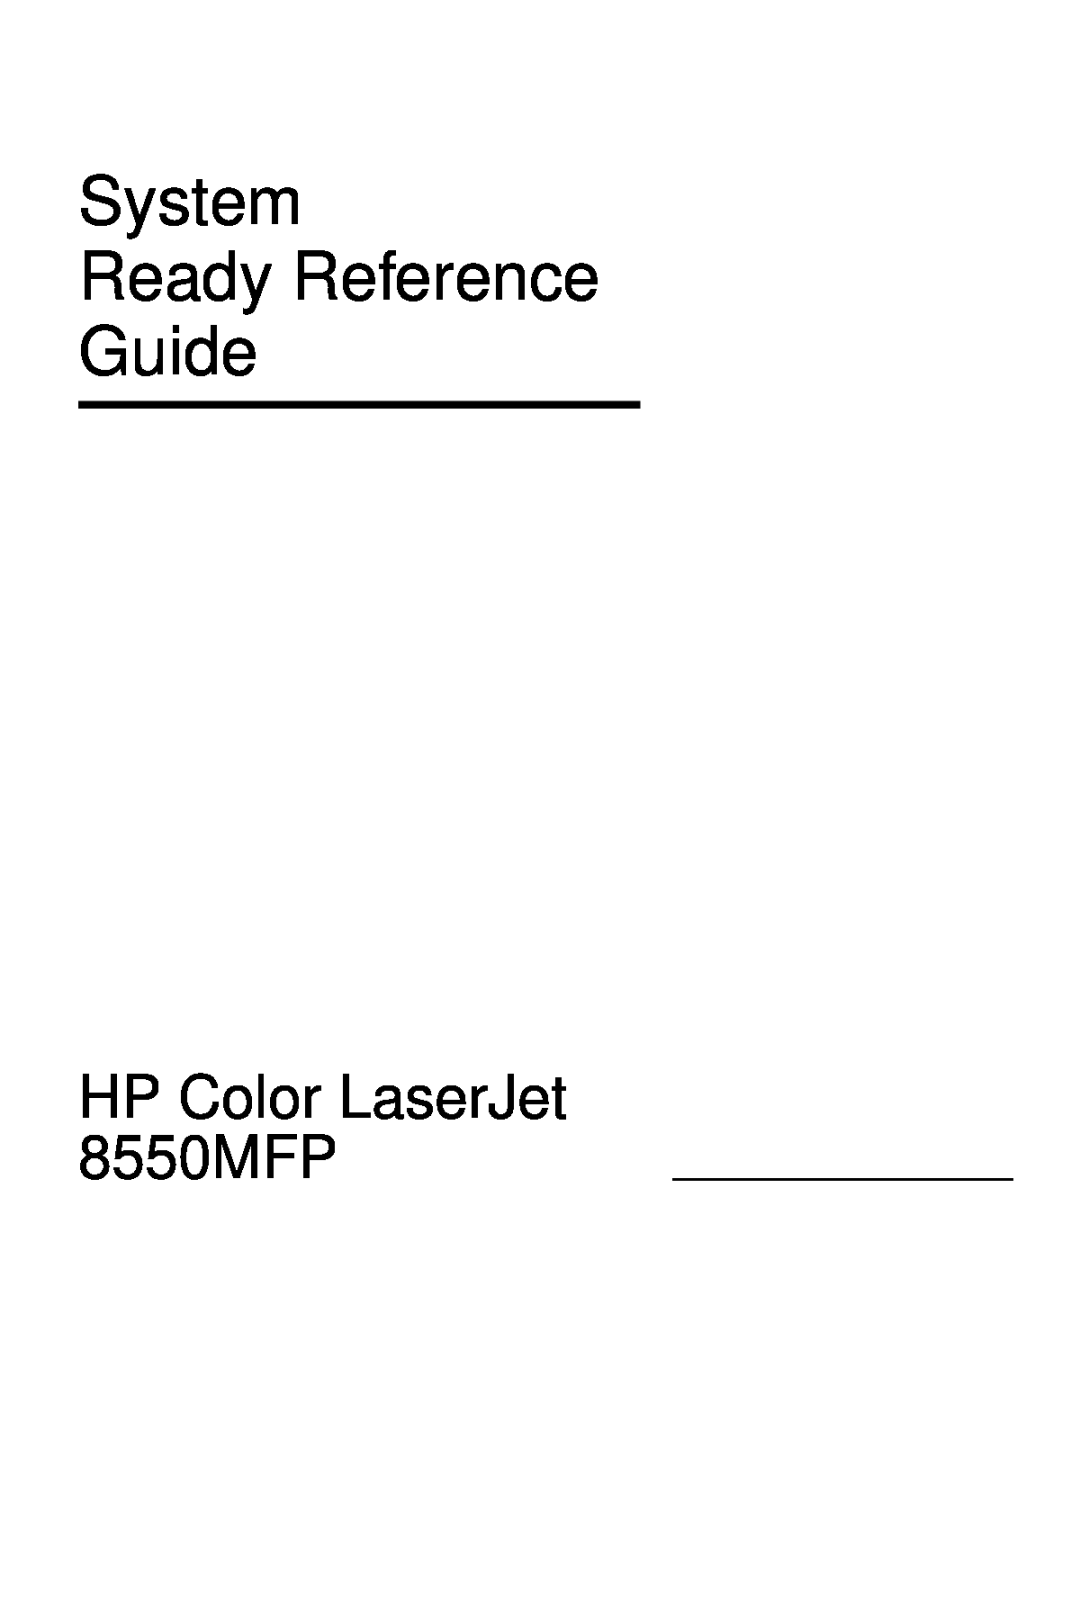 HP 8000 s manual System Ready Reference Guide, HP Color LaserJet 8550MFP 